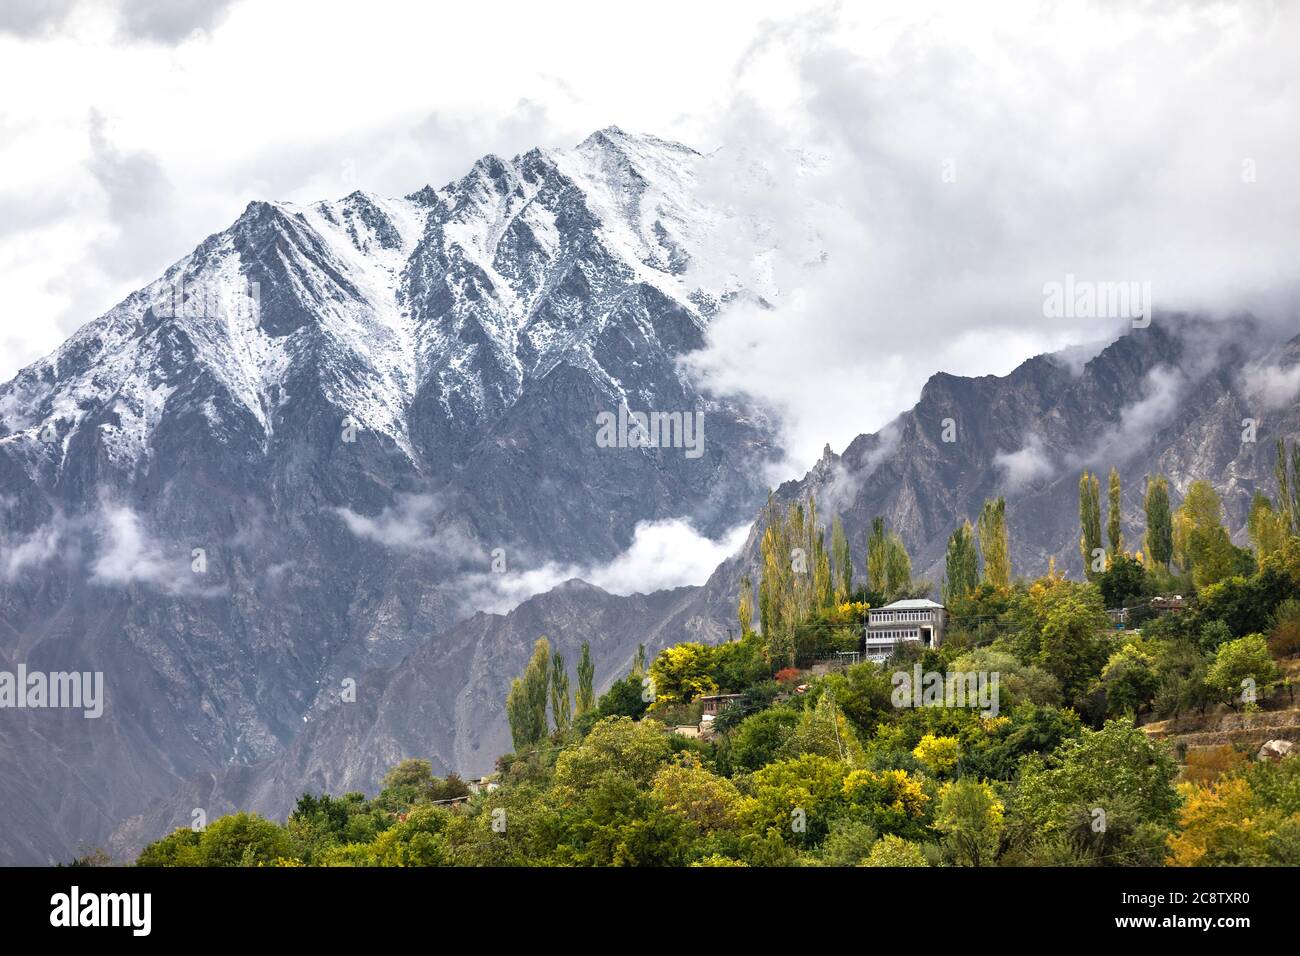 Mountain village in hunza river valley. Pakistan Northern areas  Stock Photo